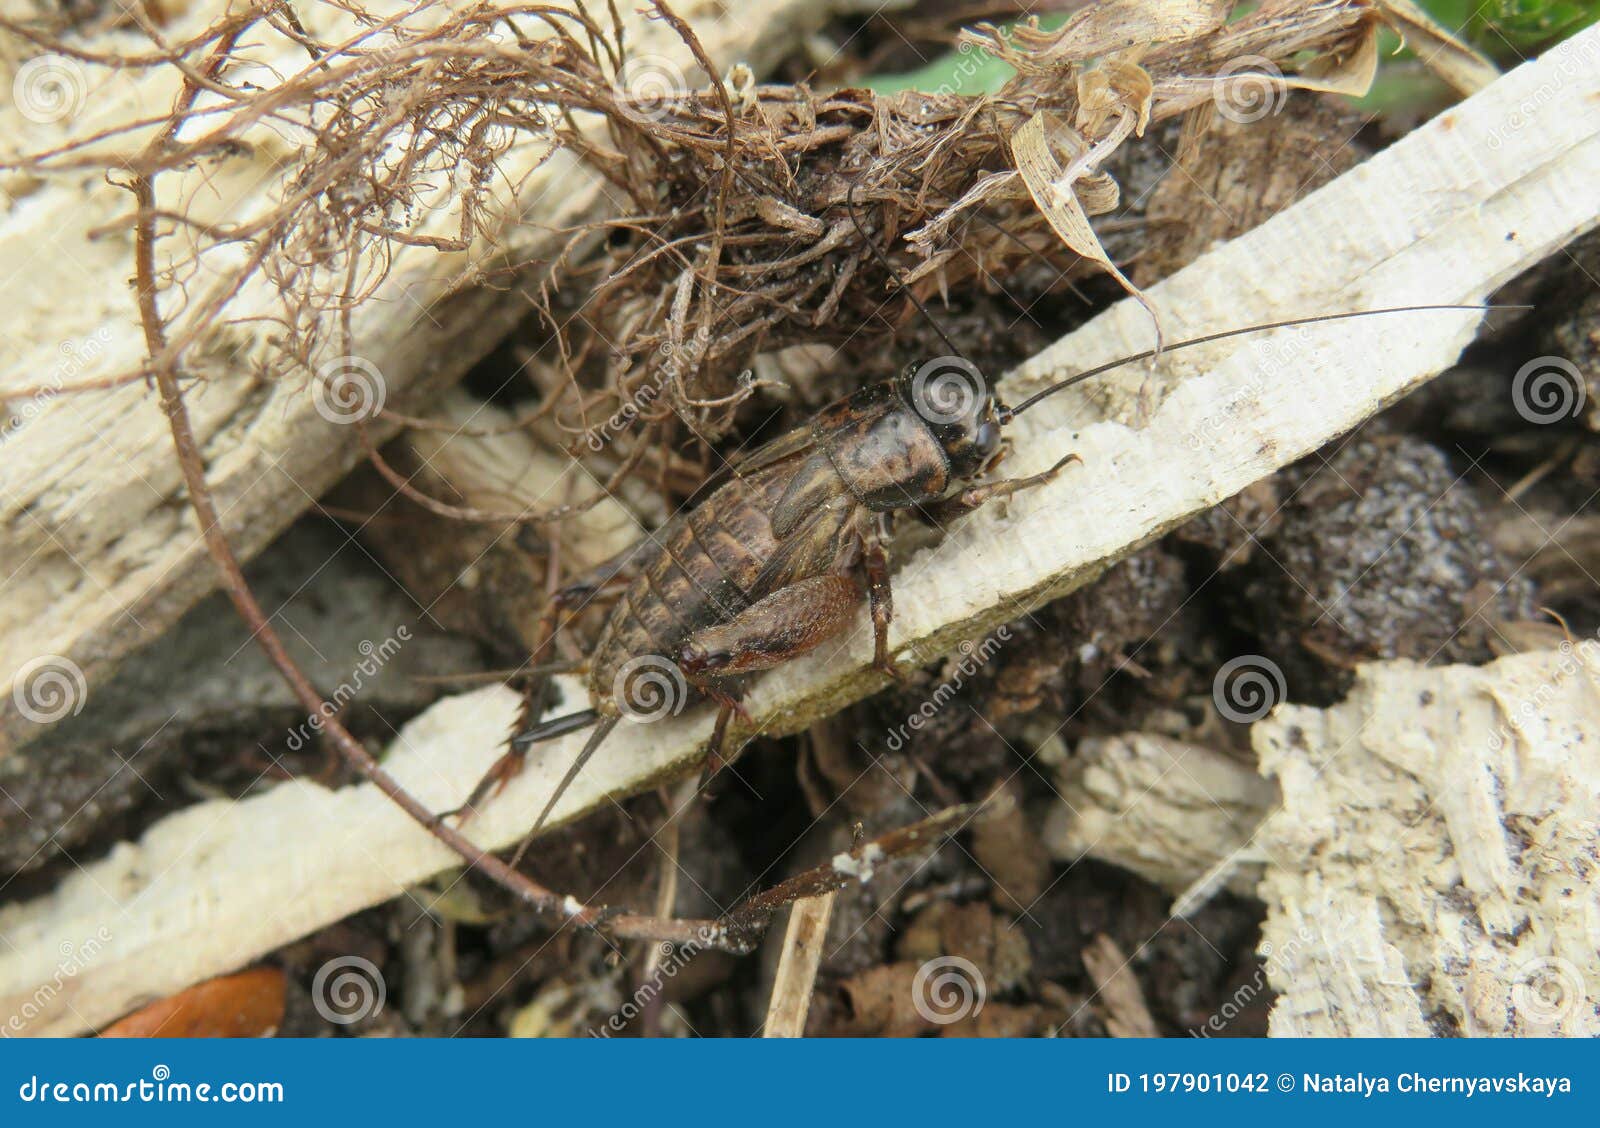 5 361 Brown Cricket Photos Free Royalty Free Stock Photos From Dreamstime